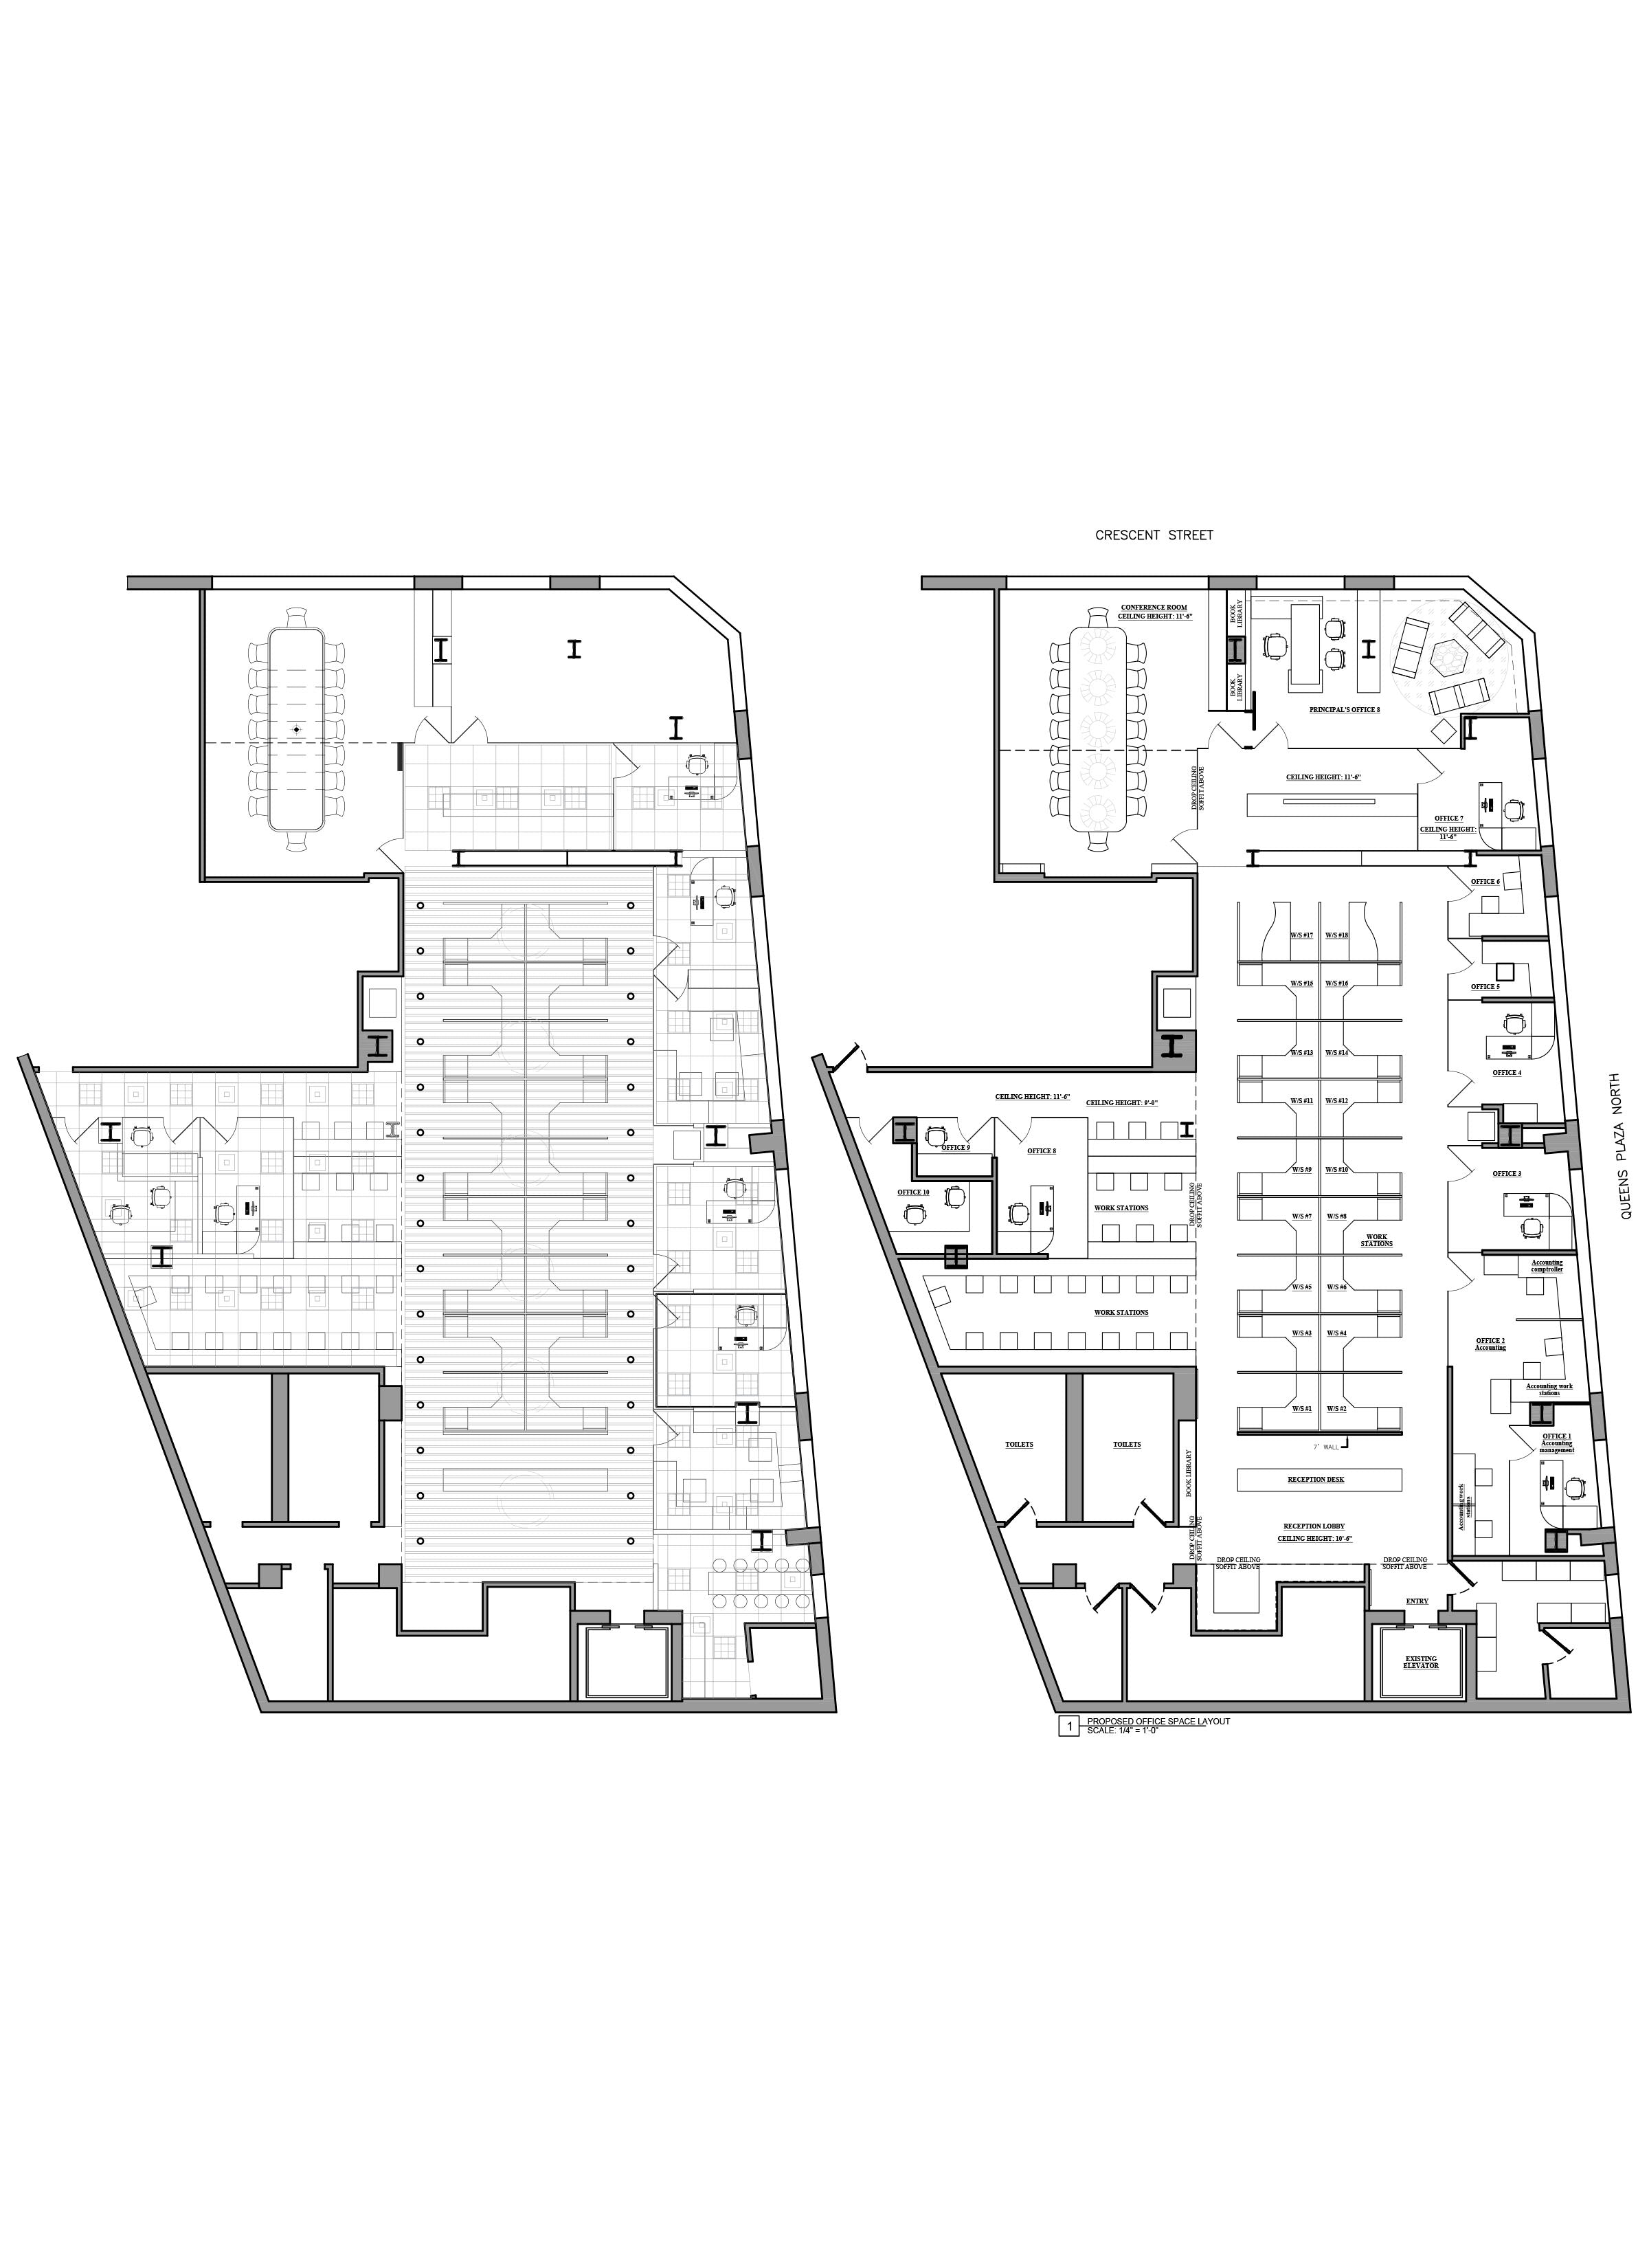 Floor Plan Design - Office Test Fit -As Built Drawings_Lawyers Office Queens, NY